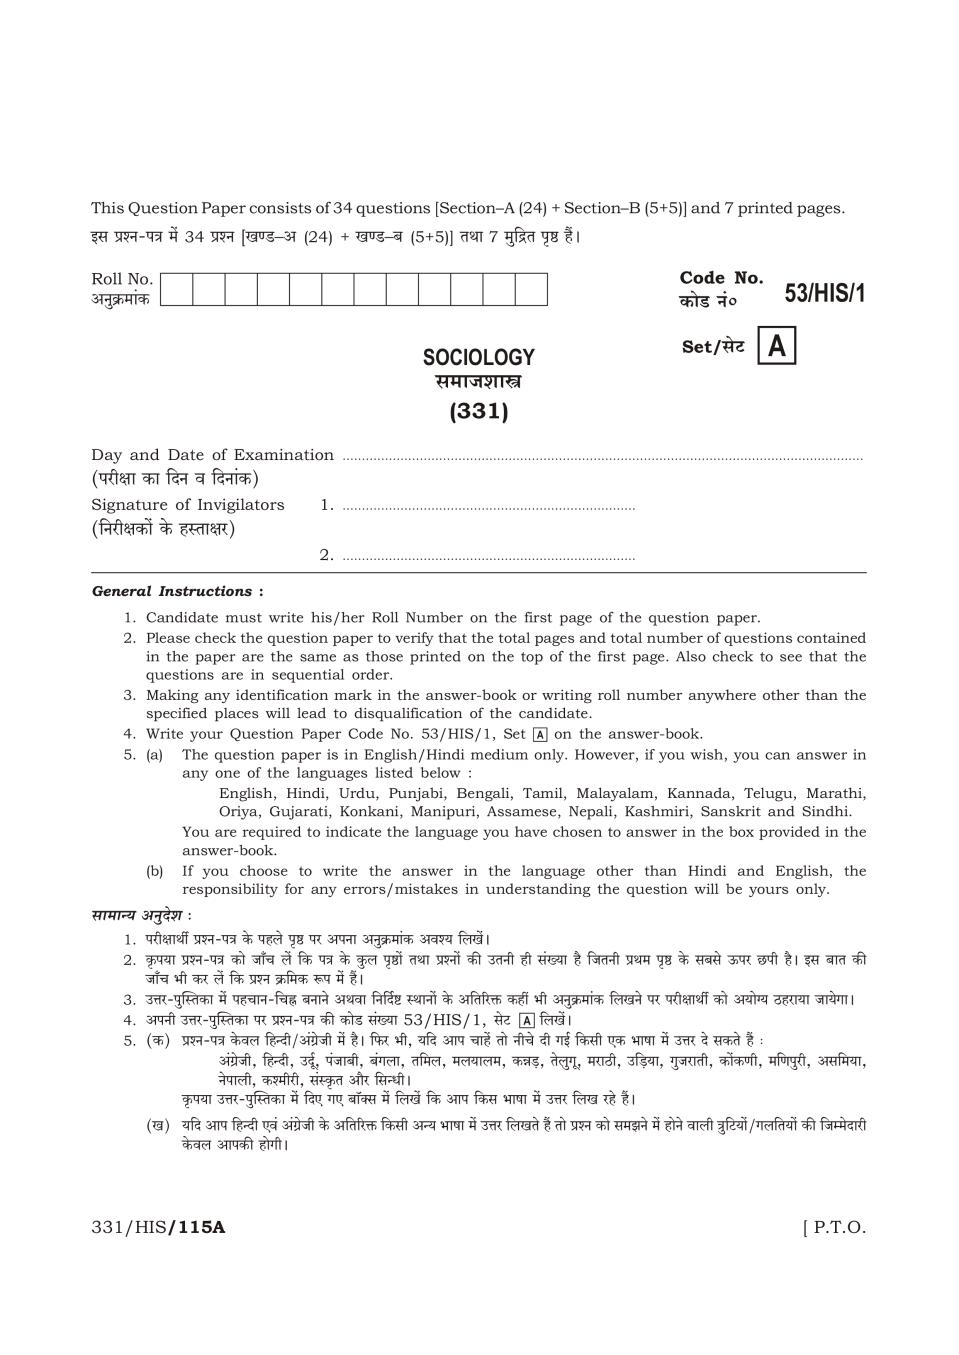 NIOS Class 12 Question Paper Oct 2016 - Sociology - Page 1